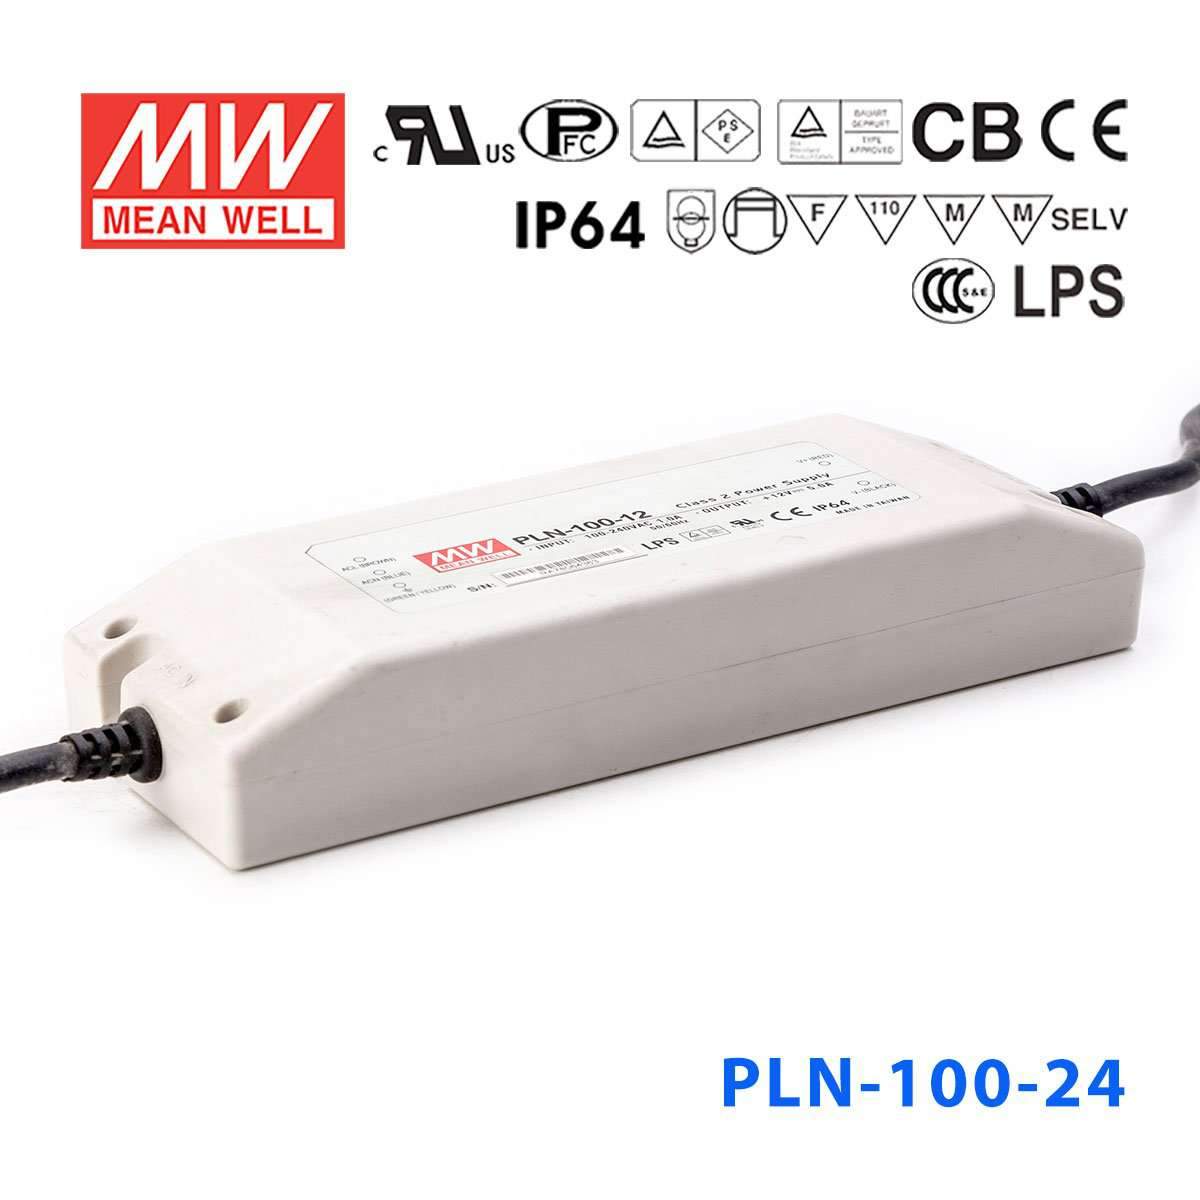 Mean Well PLN-100-24 Power Supply 100W 24V - IP64